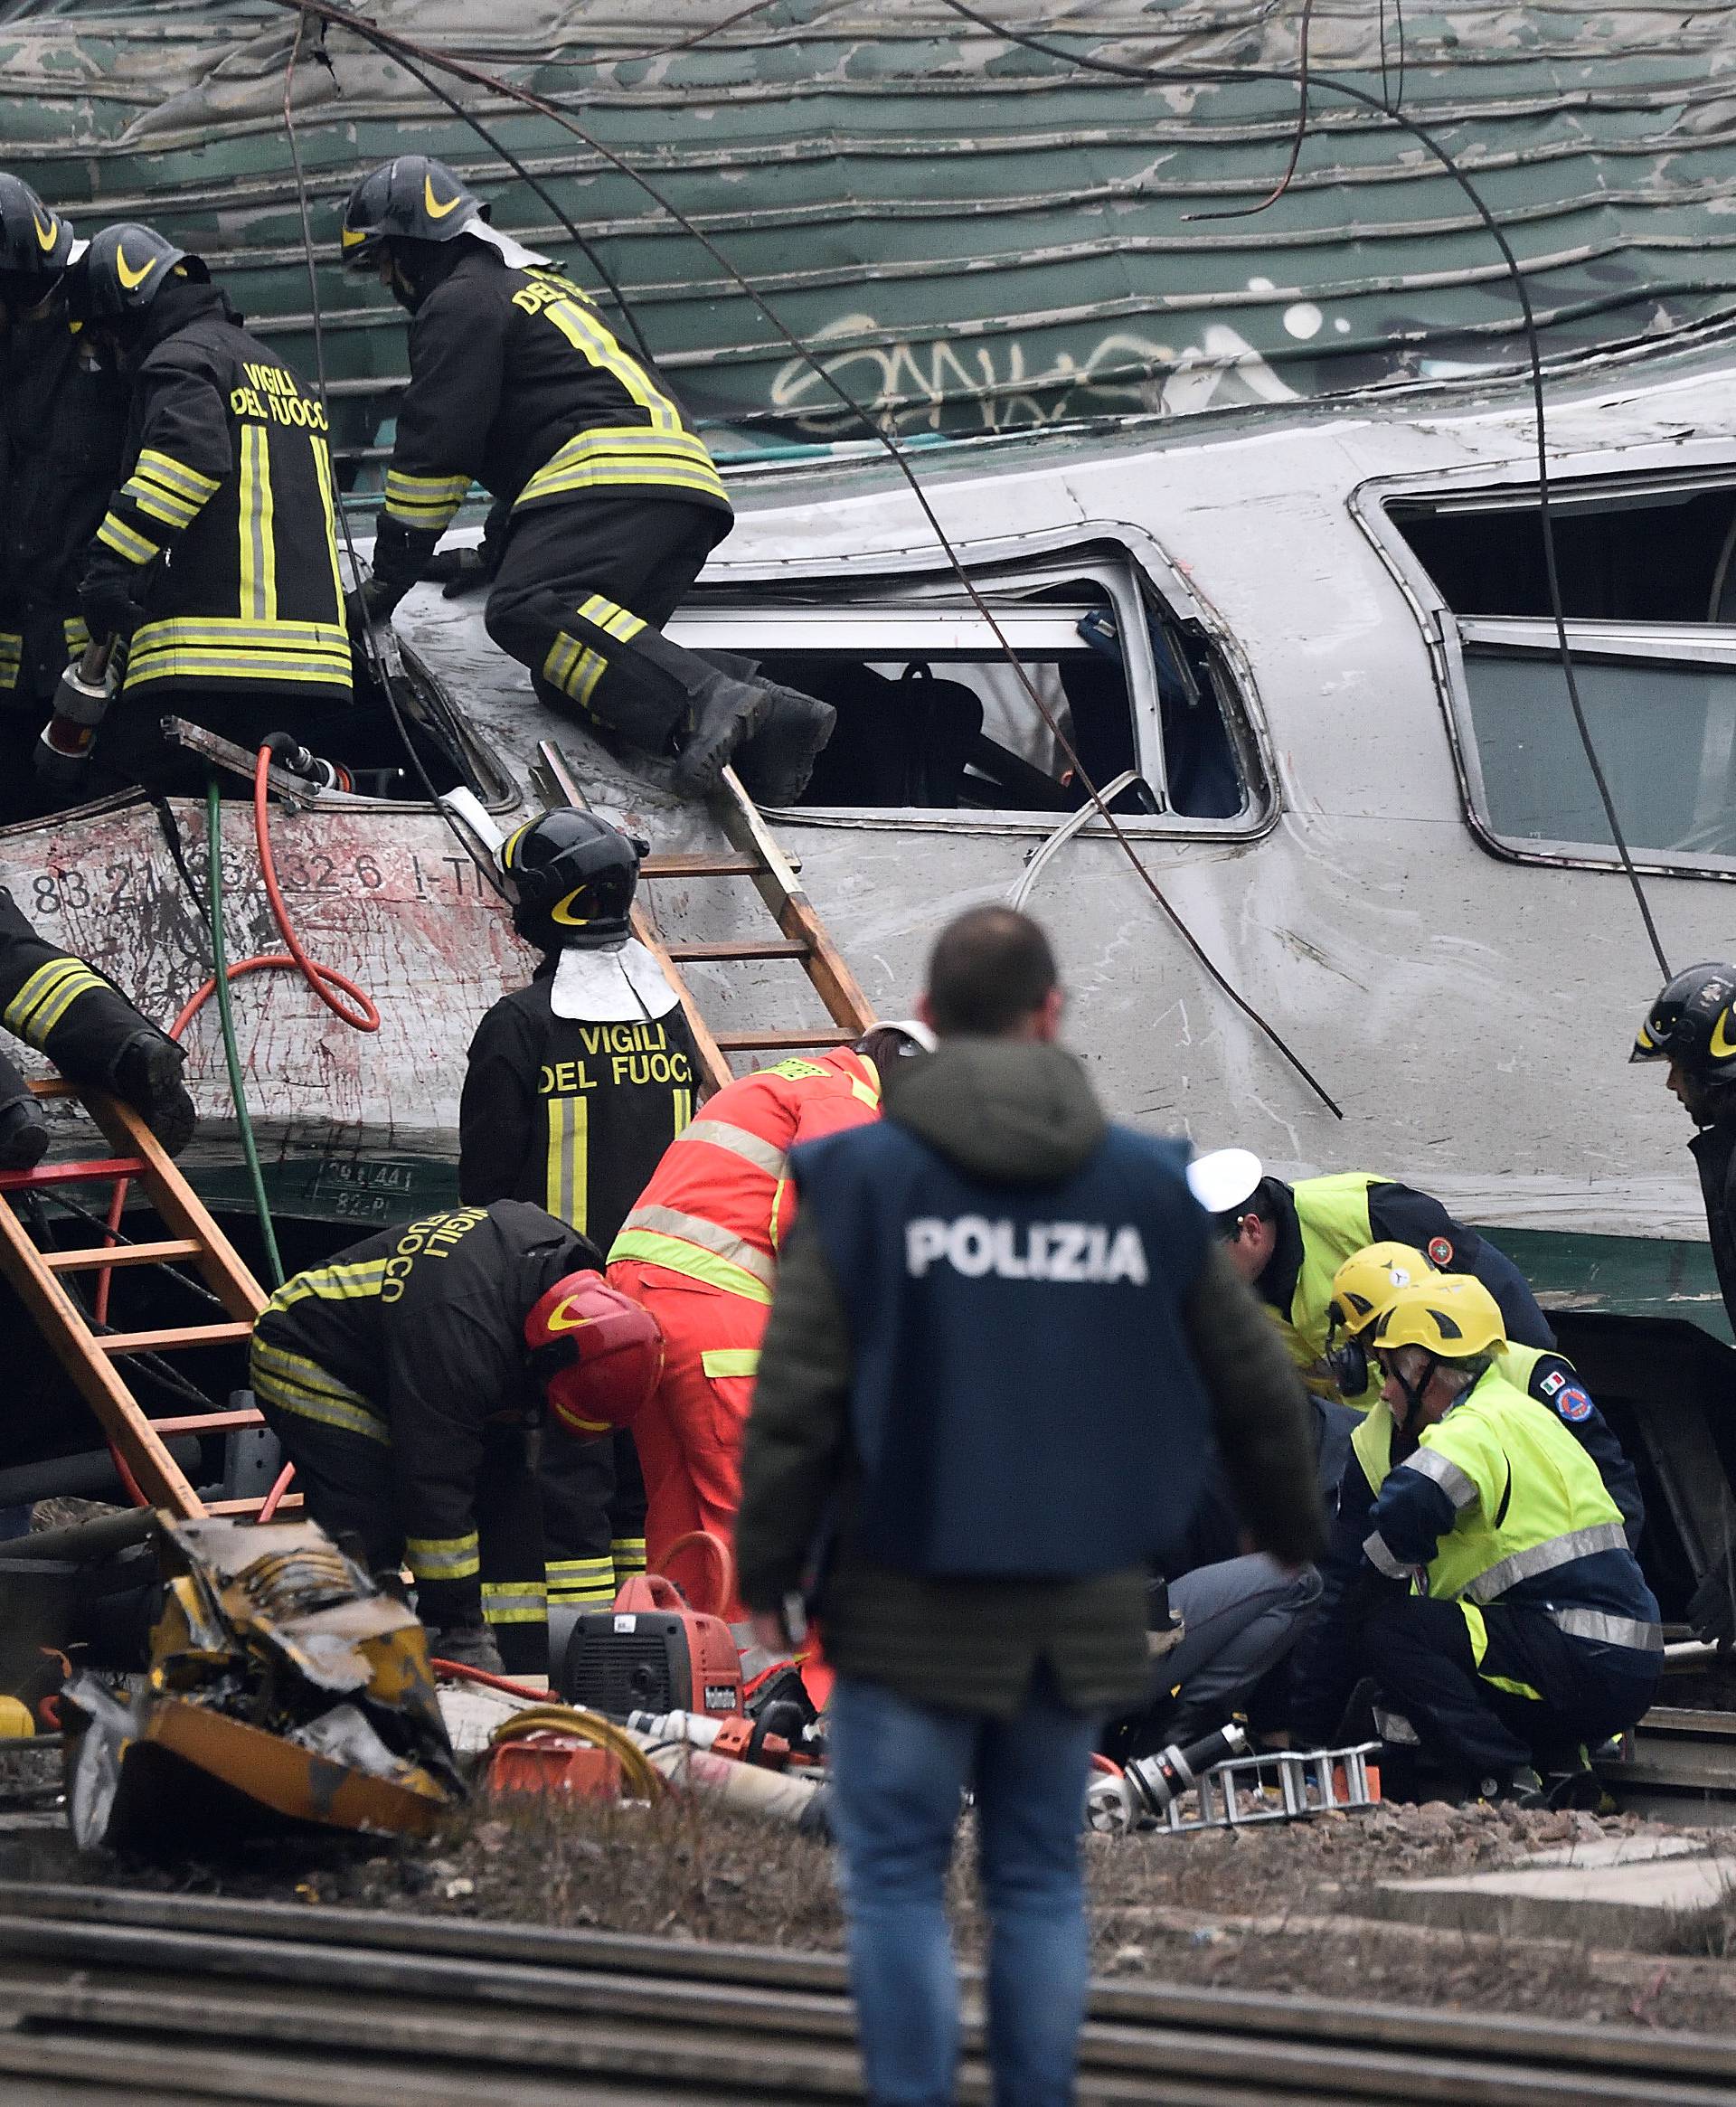 Fire fighters and police officers work around derailed trains in Pioltello, on the outskirts of Milan